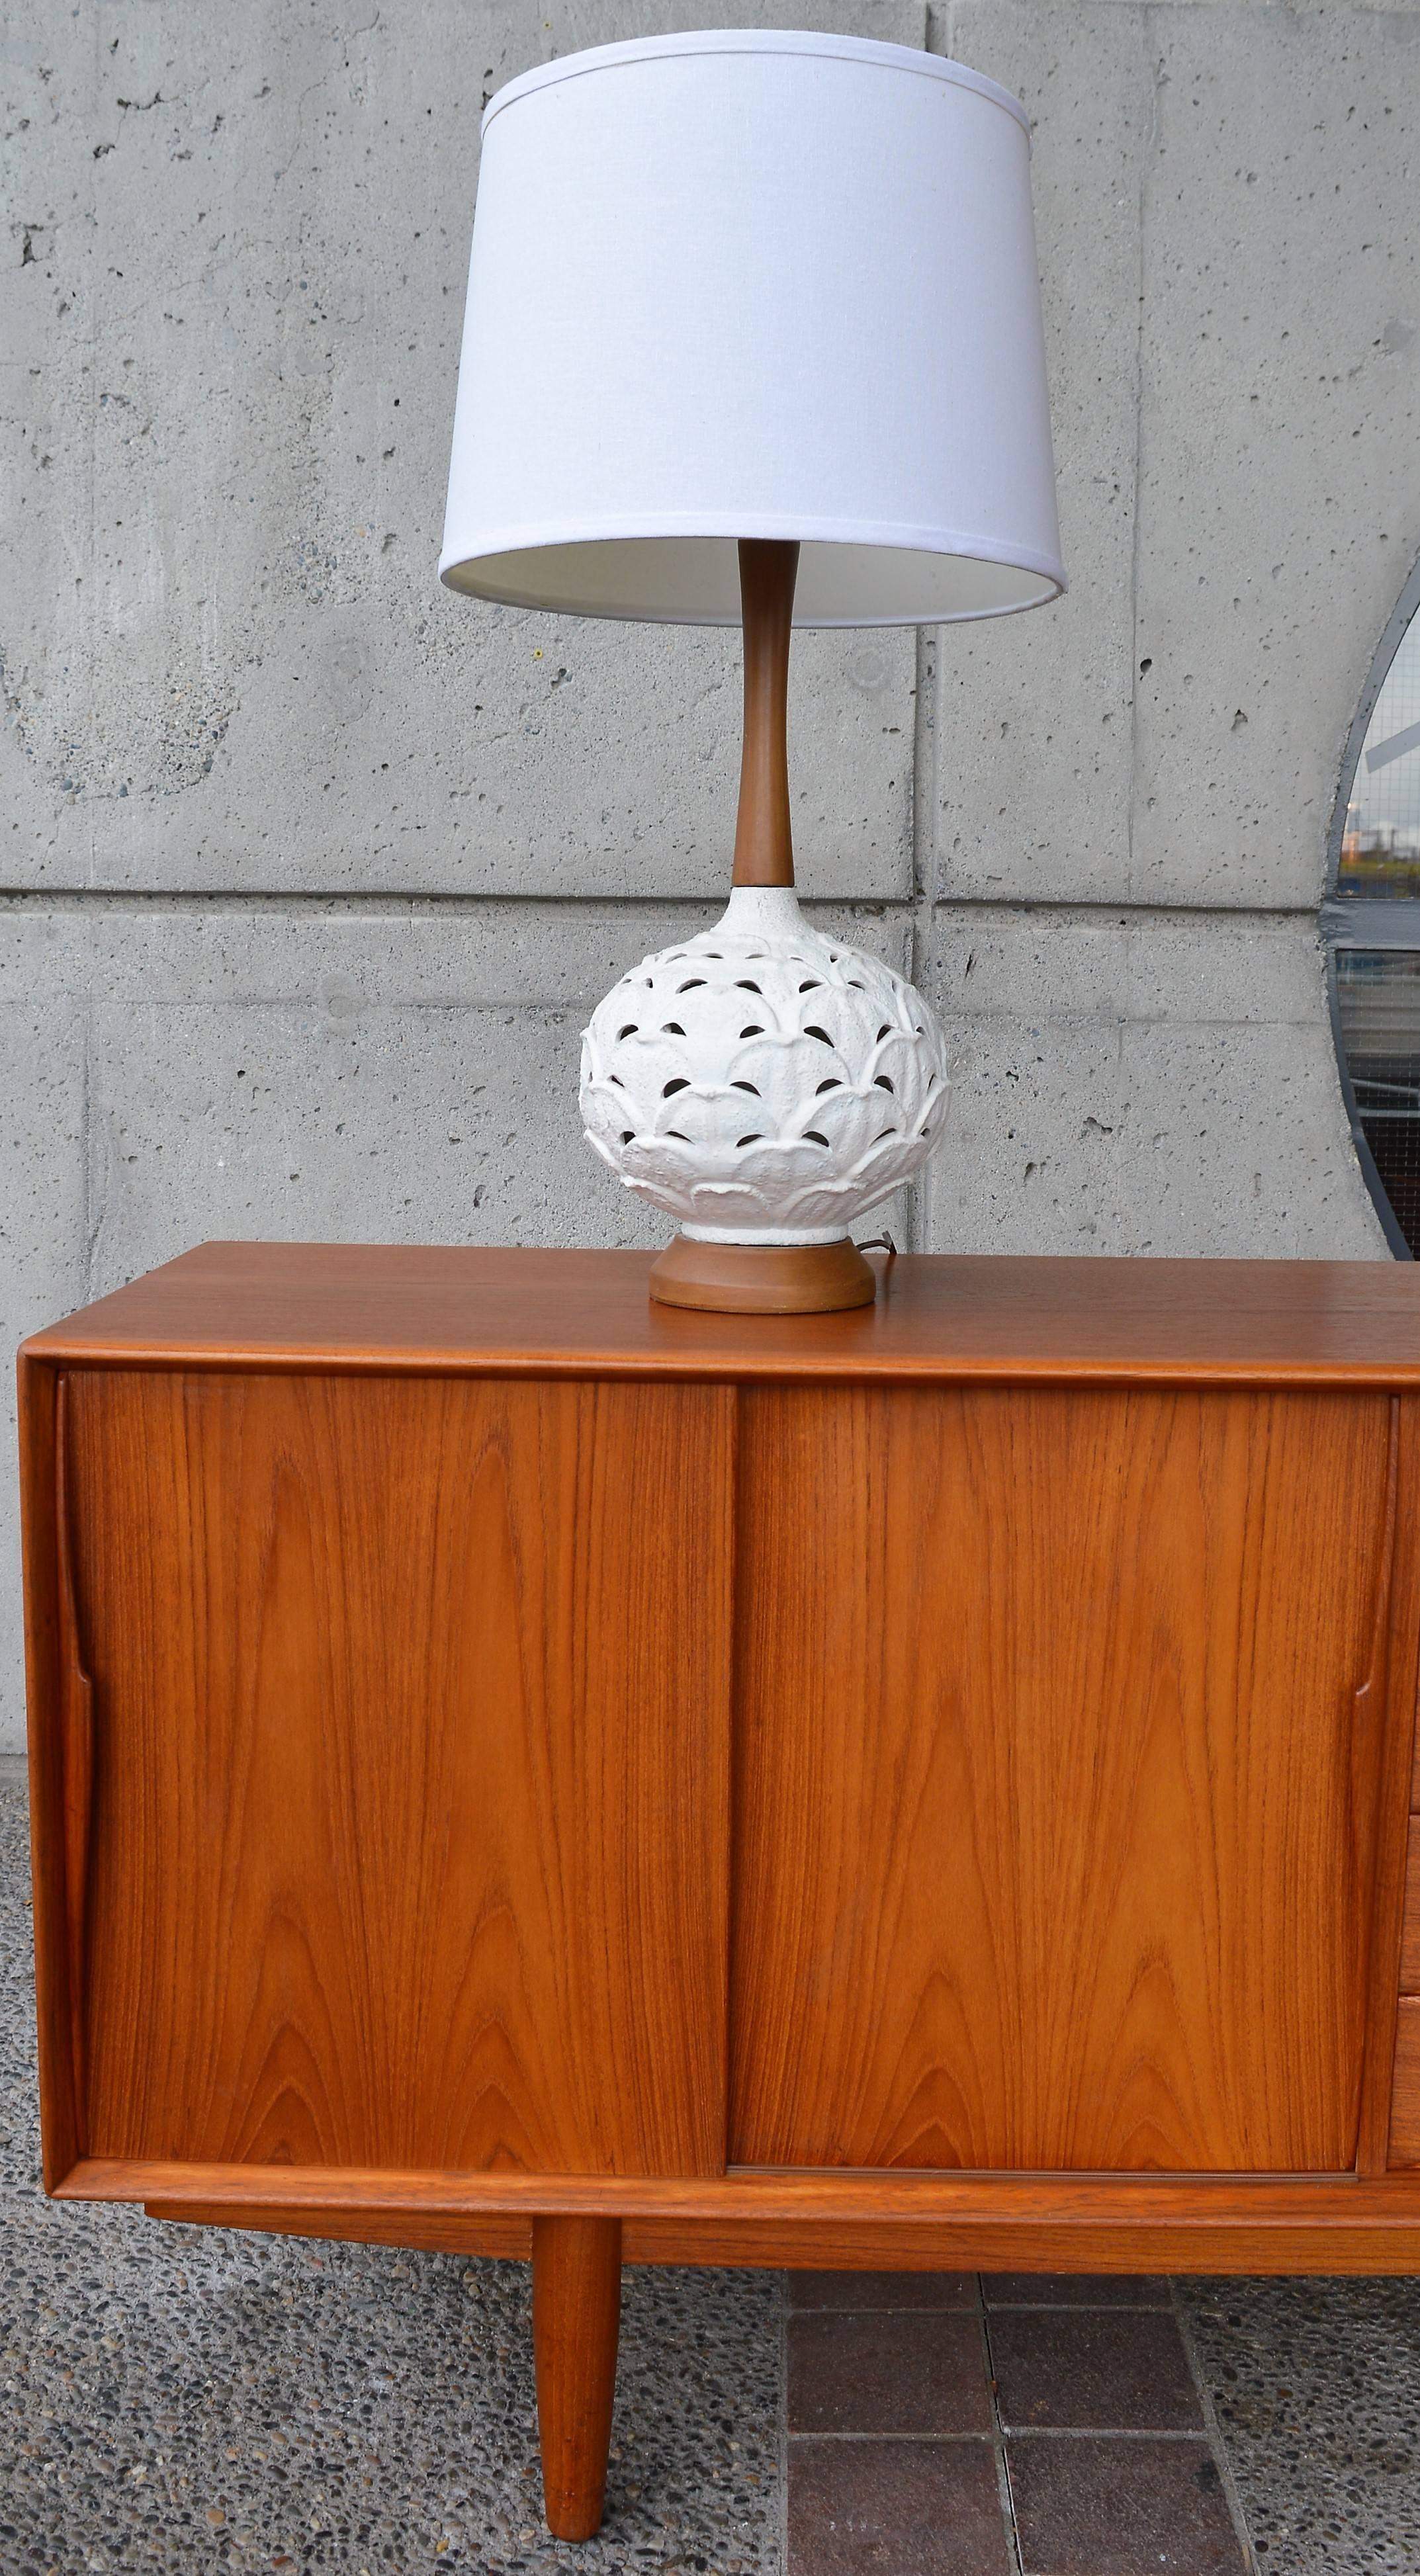 This lovely Mid-Century Modern white ceramic lamp has a wonderful scalloped petal design with airy cutaways. Featuring a sculptural solid walnut base and stem and in fantastic condition. Please note the lamp comes with the brass harp and finial, but